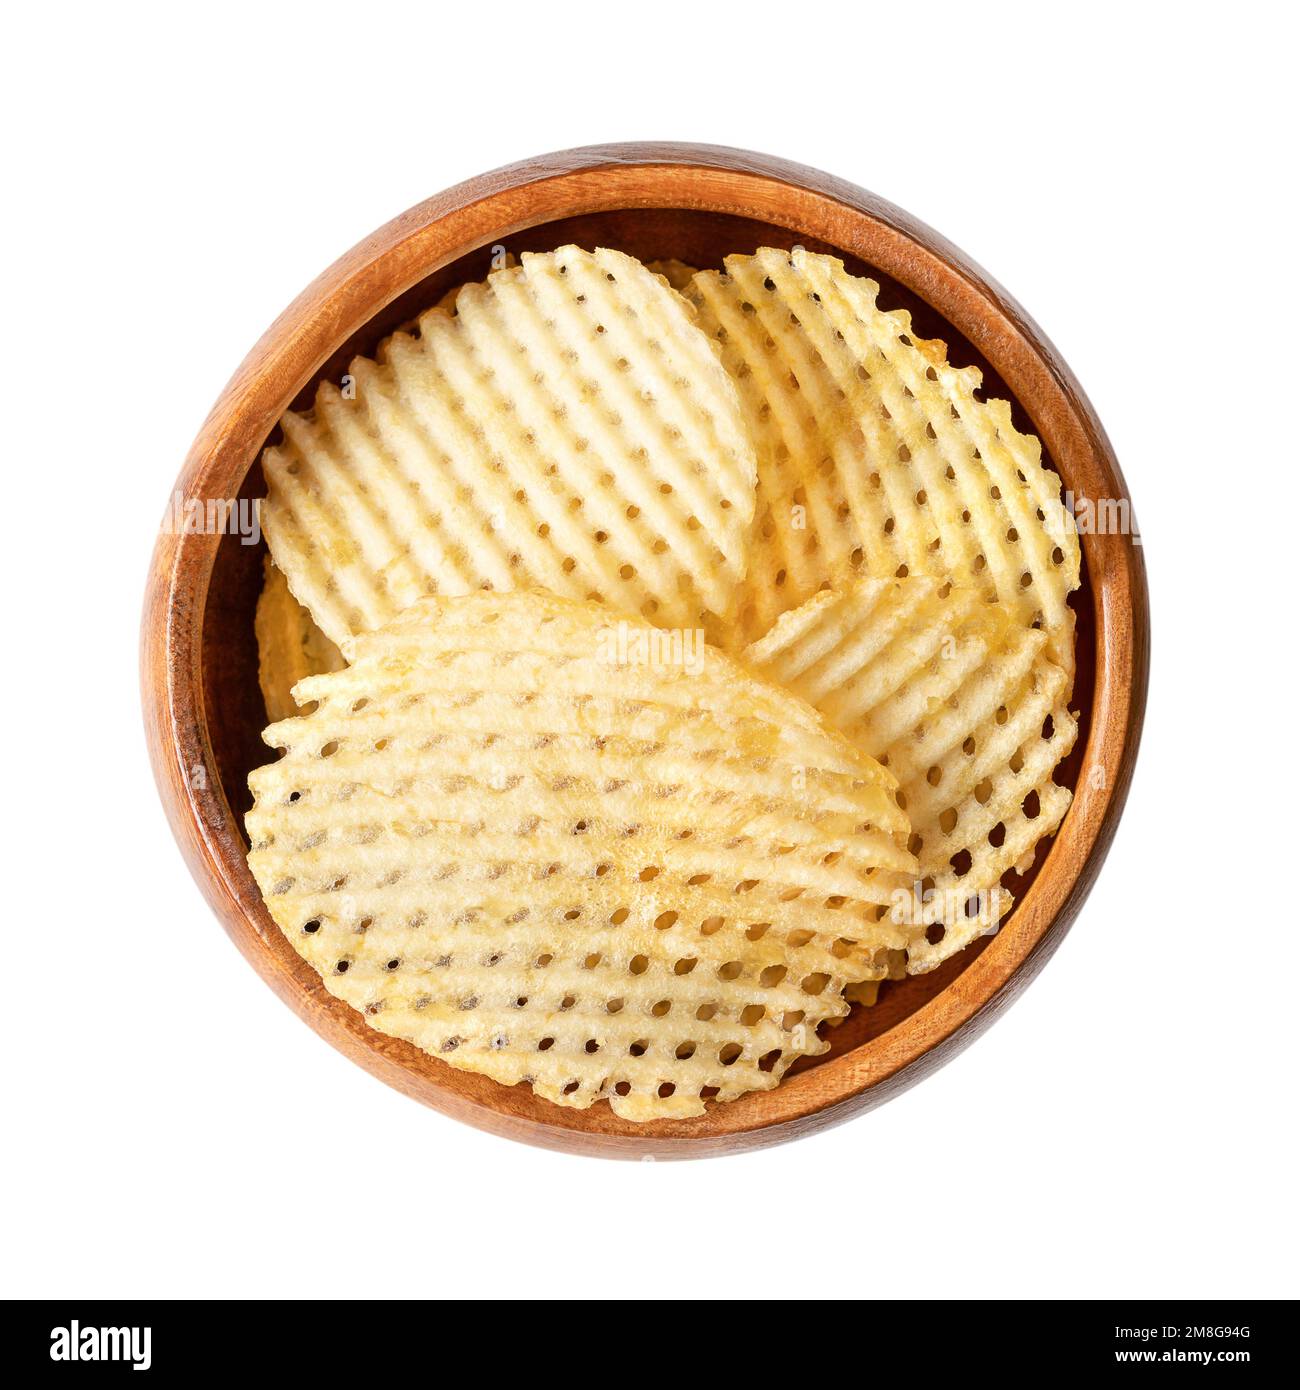 Lattice cut potato chips, in a wooden bowl. Cut crisps with grid pattern, deep fried in oil until crunchy and salted. A snack, side dish or appetizer. Stock Photo